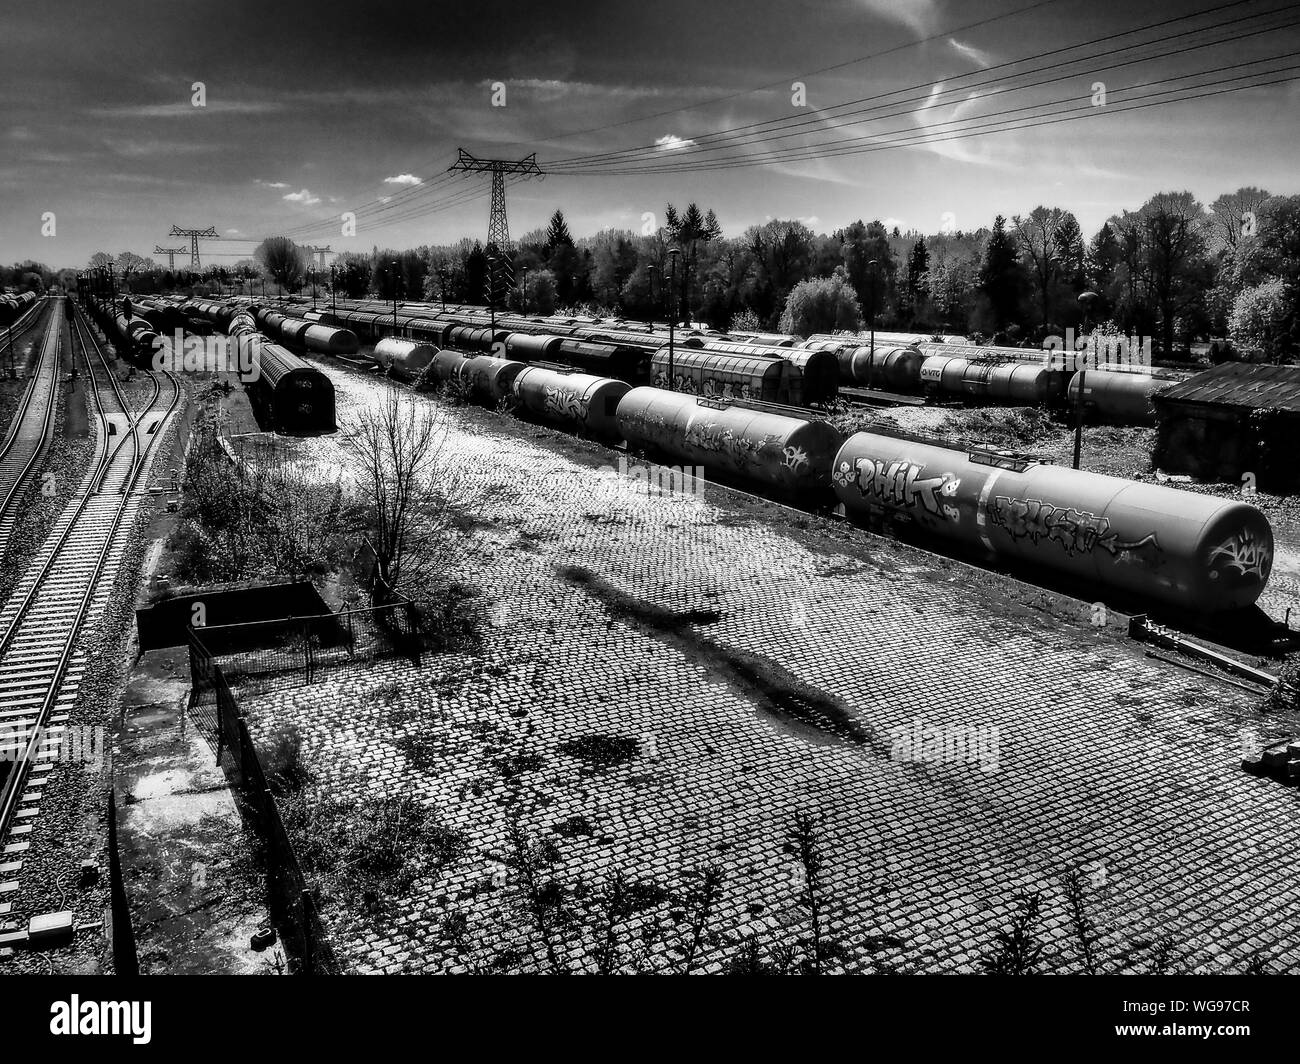 Oil Tankers At Shunting Yard Against Sky Stock Photo